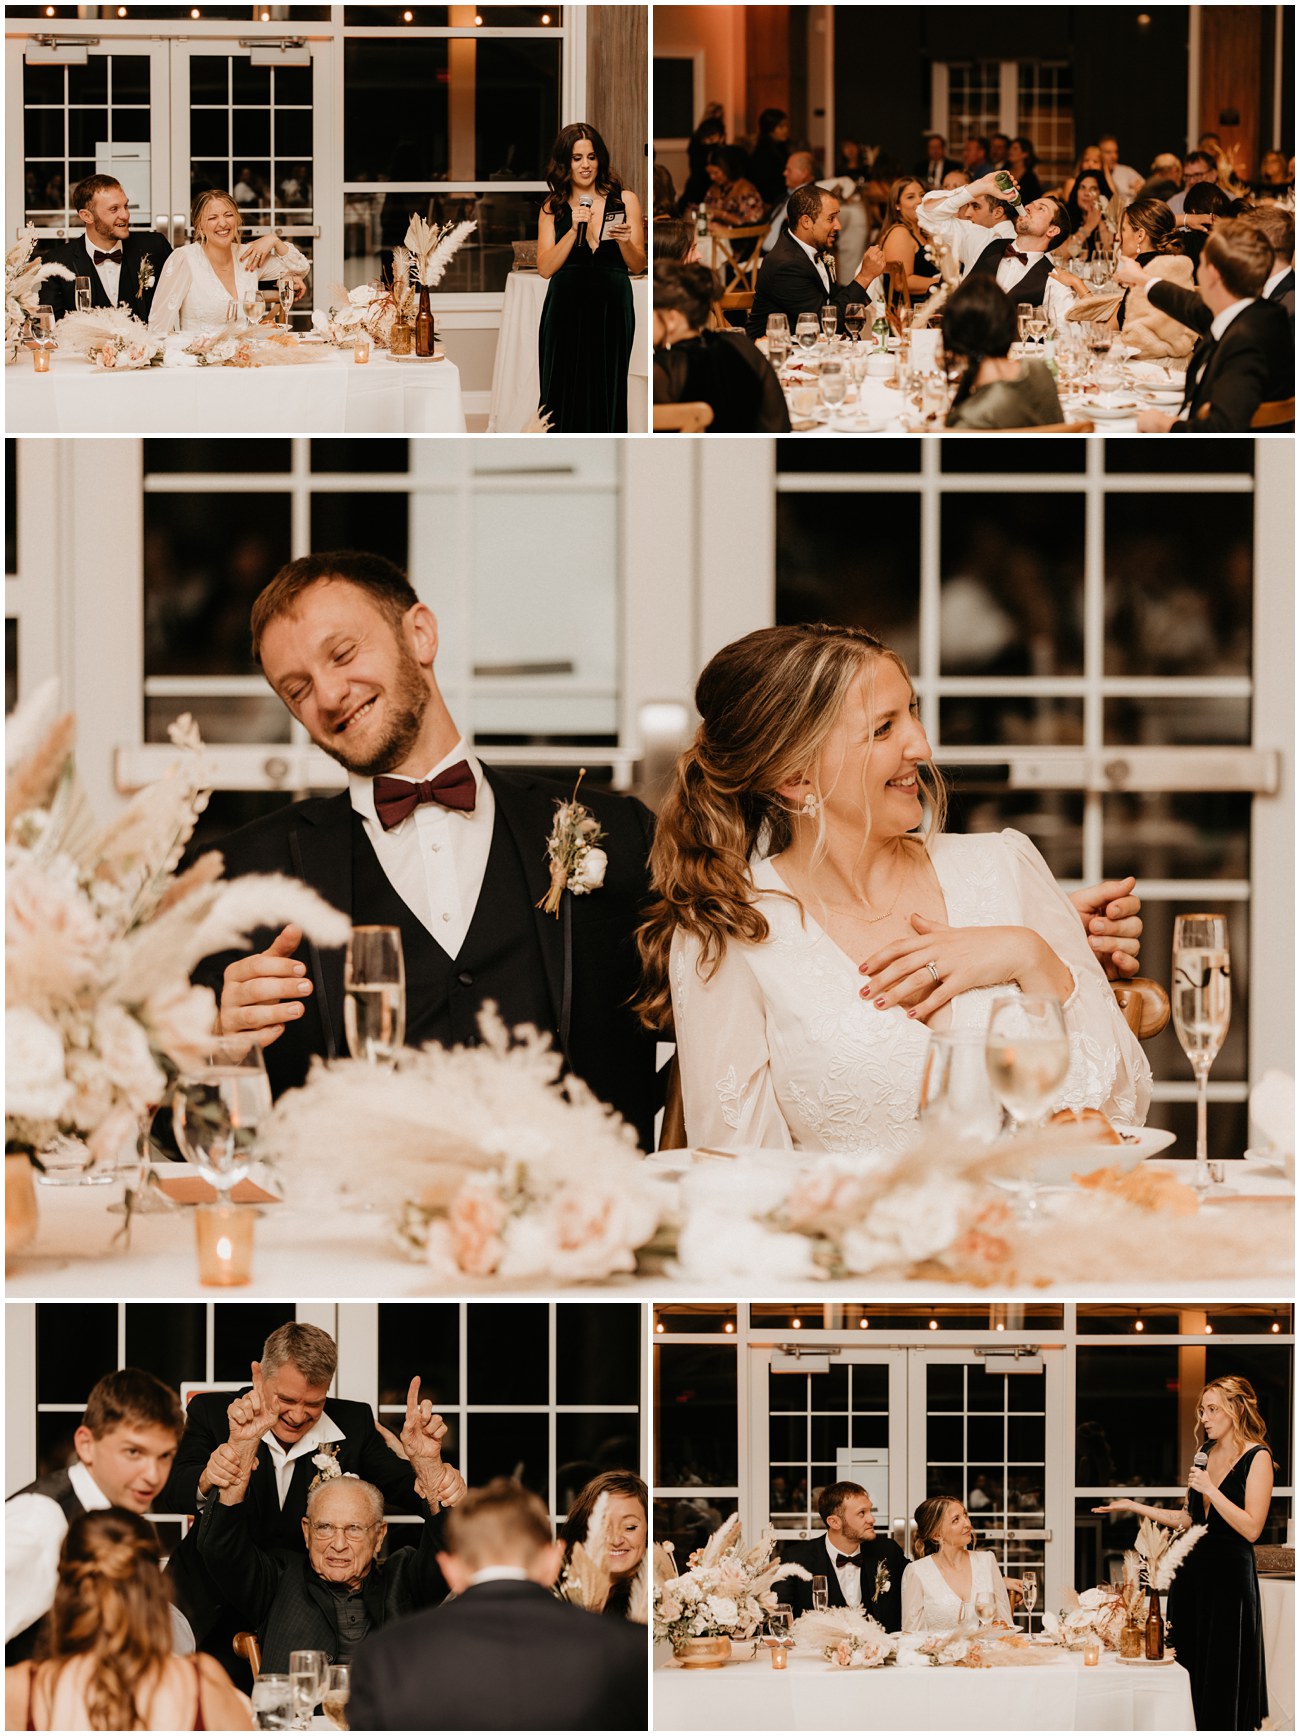 Collage of speeches made at the reception of a fall Boathouse at Mercer Lake wedding